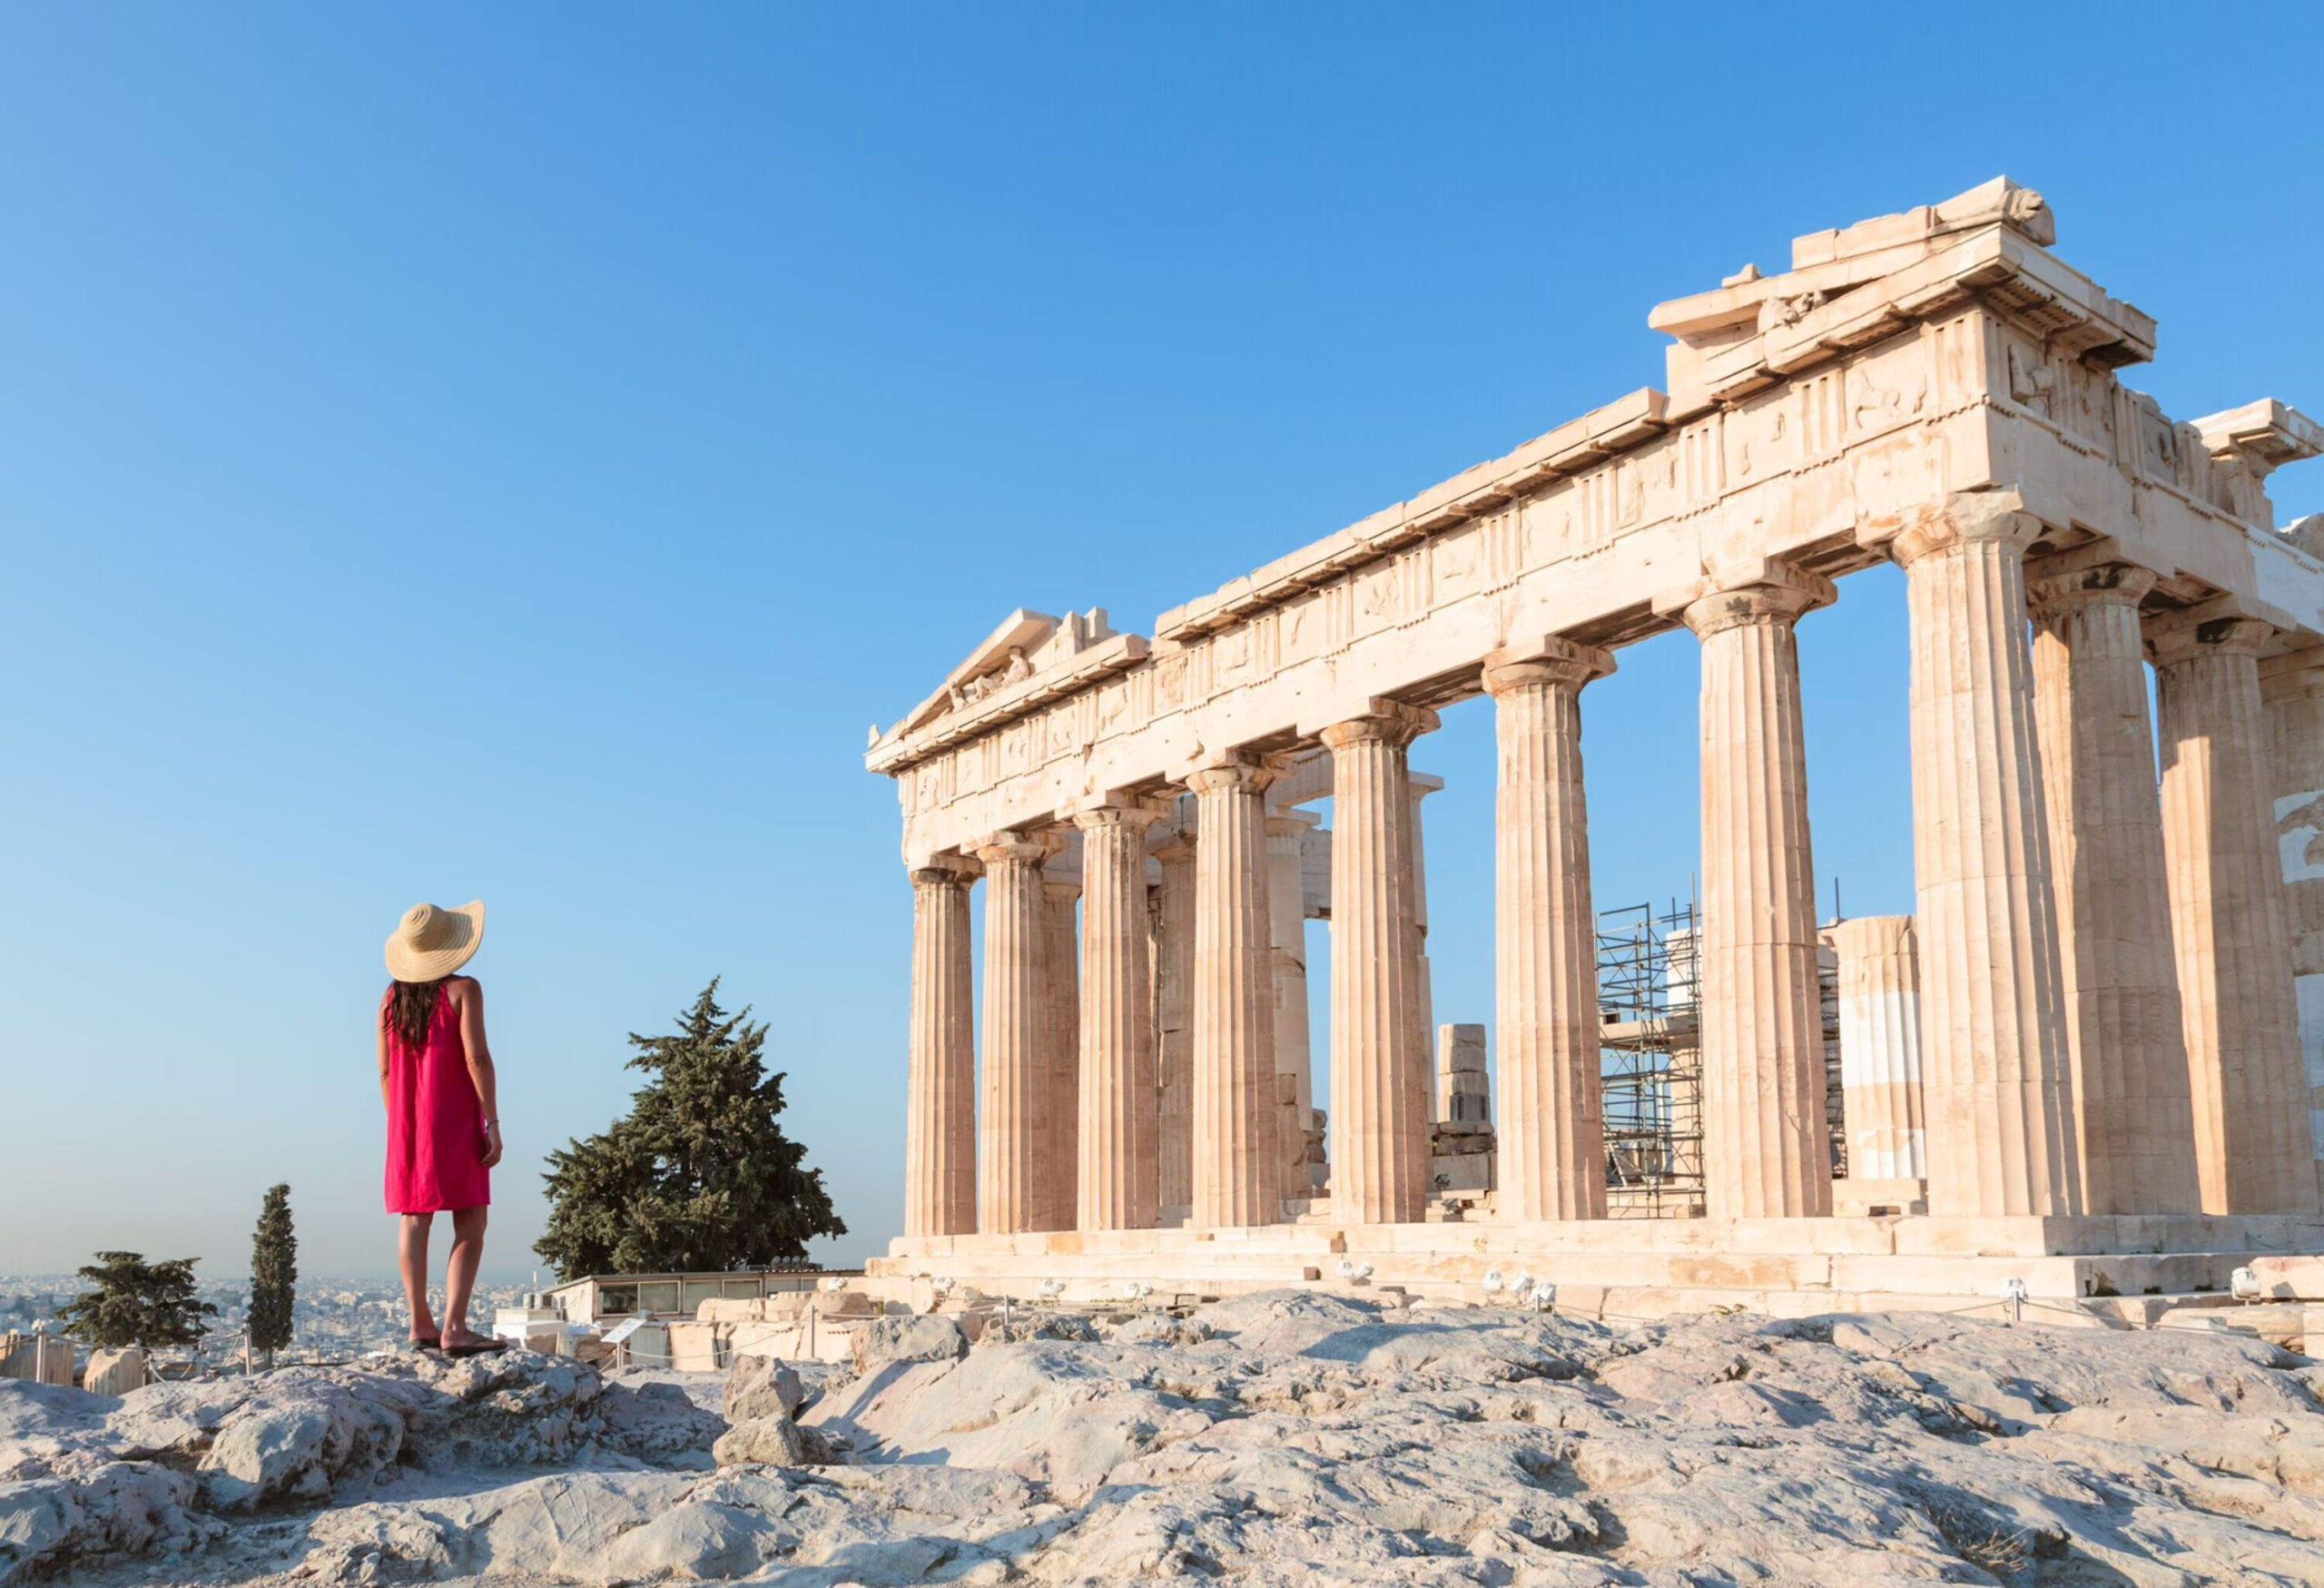 A woman in a pink dress is standing in front Parthenon temple on the Acropolis, Athens, Greece.